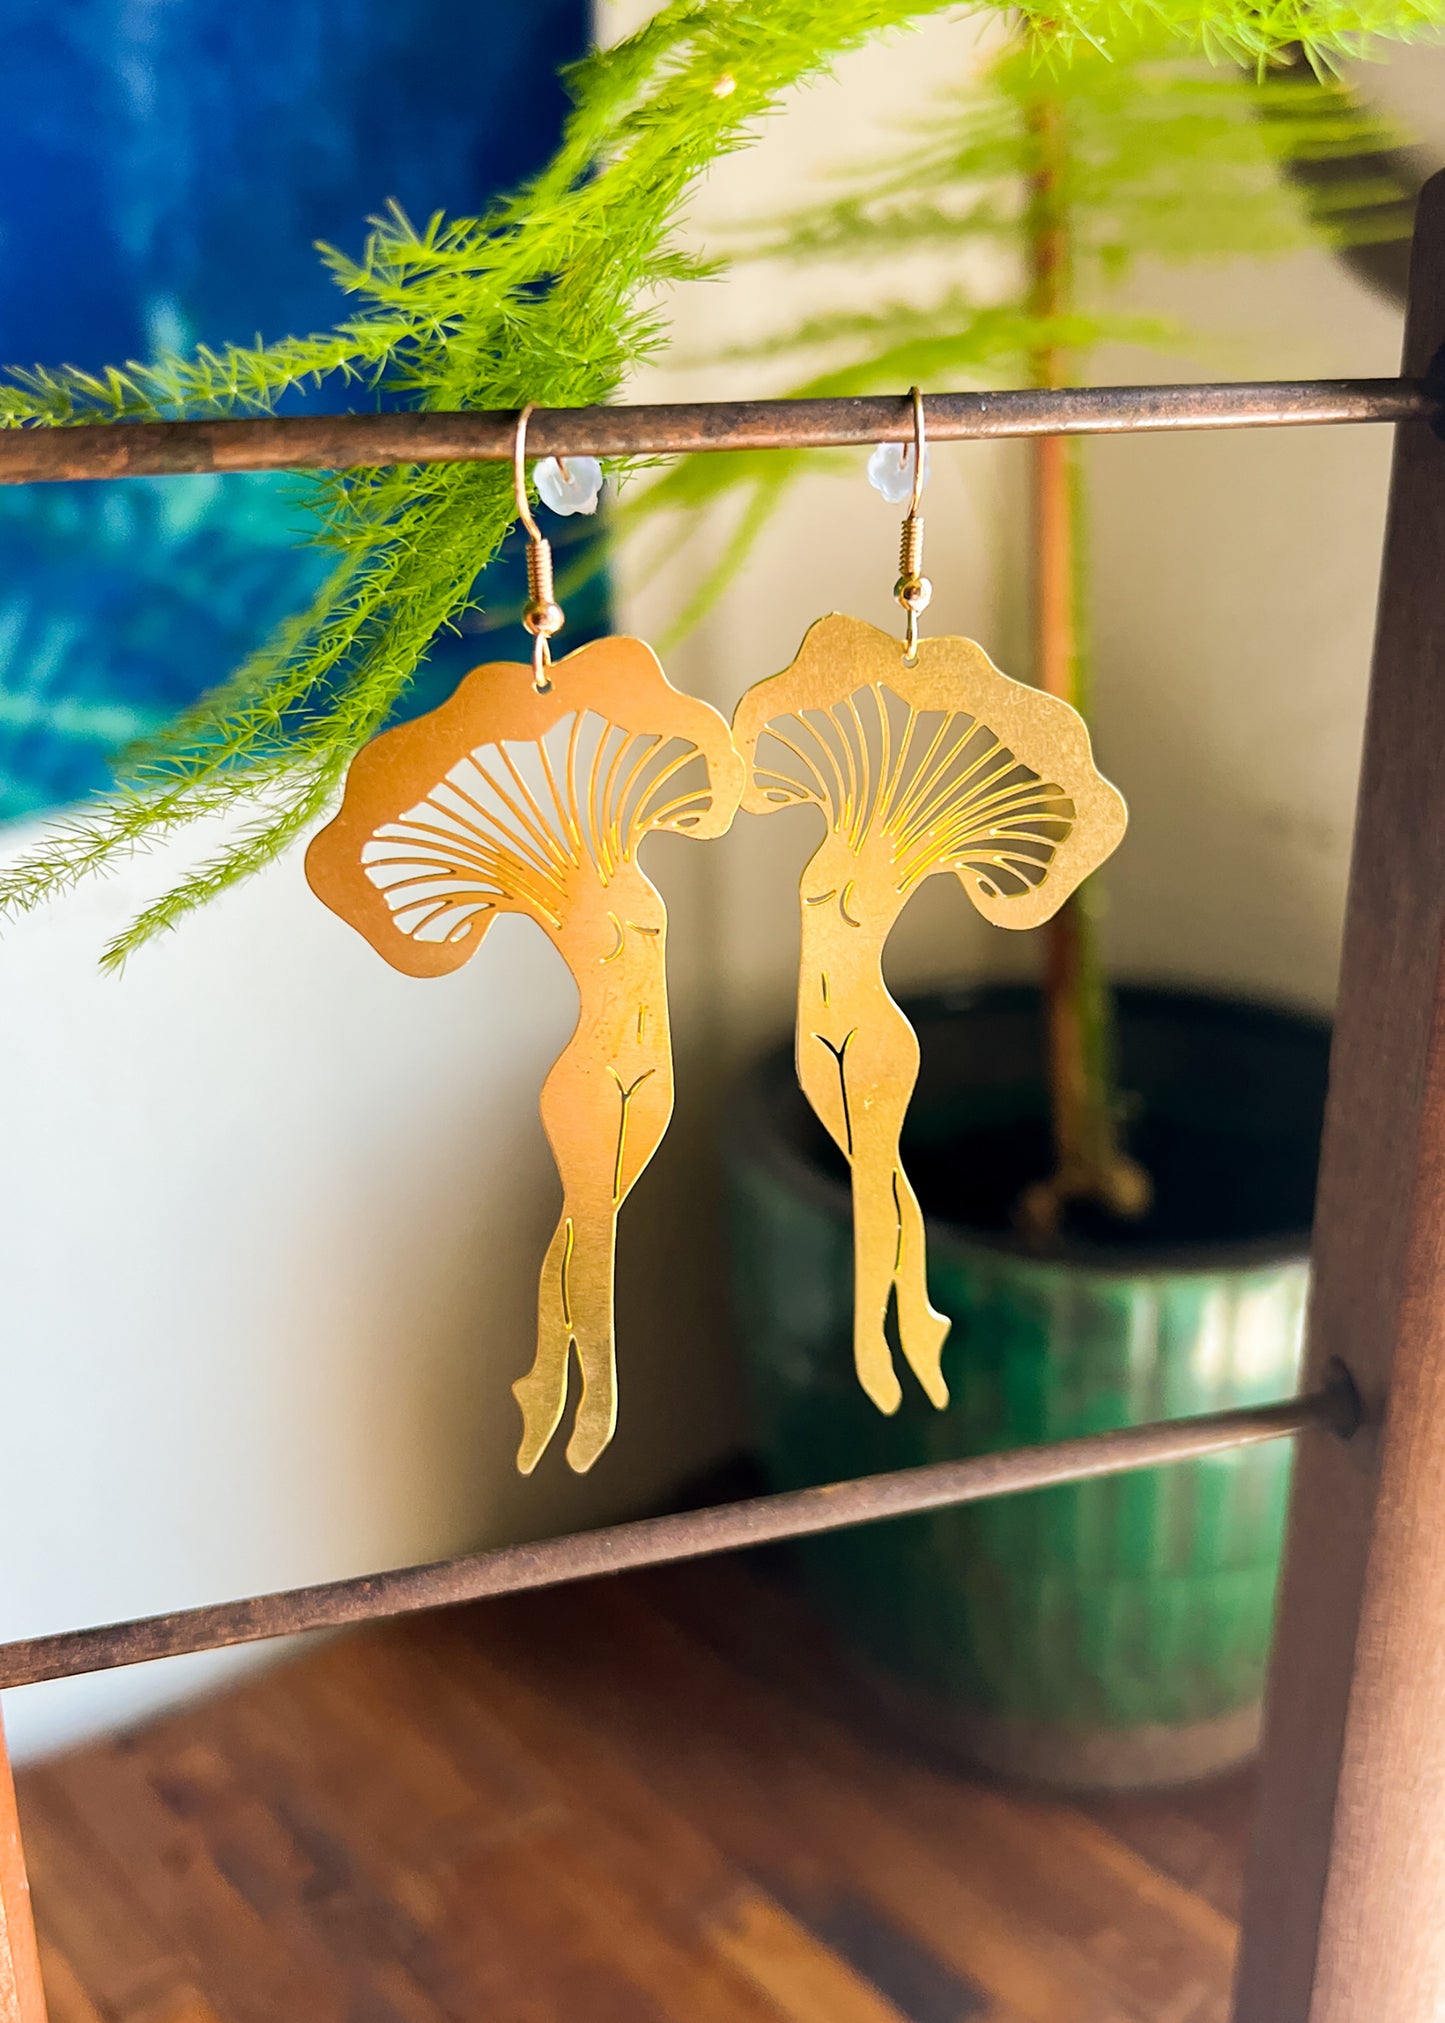 Mushroom Lady Earrings | Brass Gold Tone Stainless Steel Sterling Silver Dangles | Cottagecore Mushroomcore Metal Cut Out Charm Jewelry